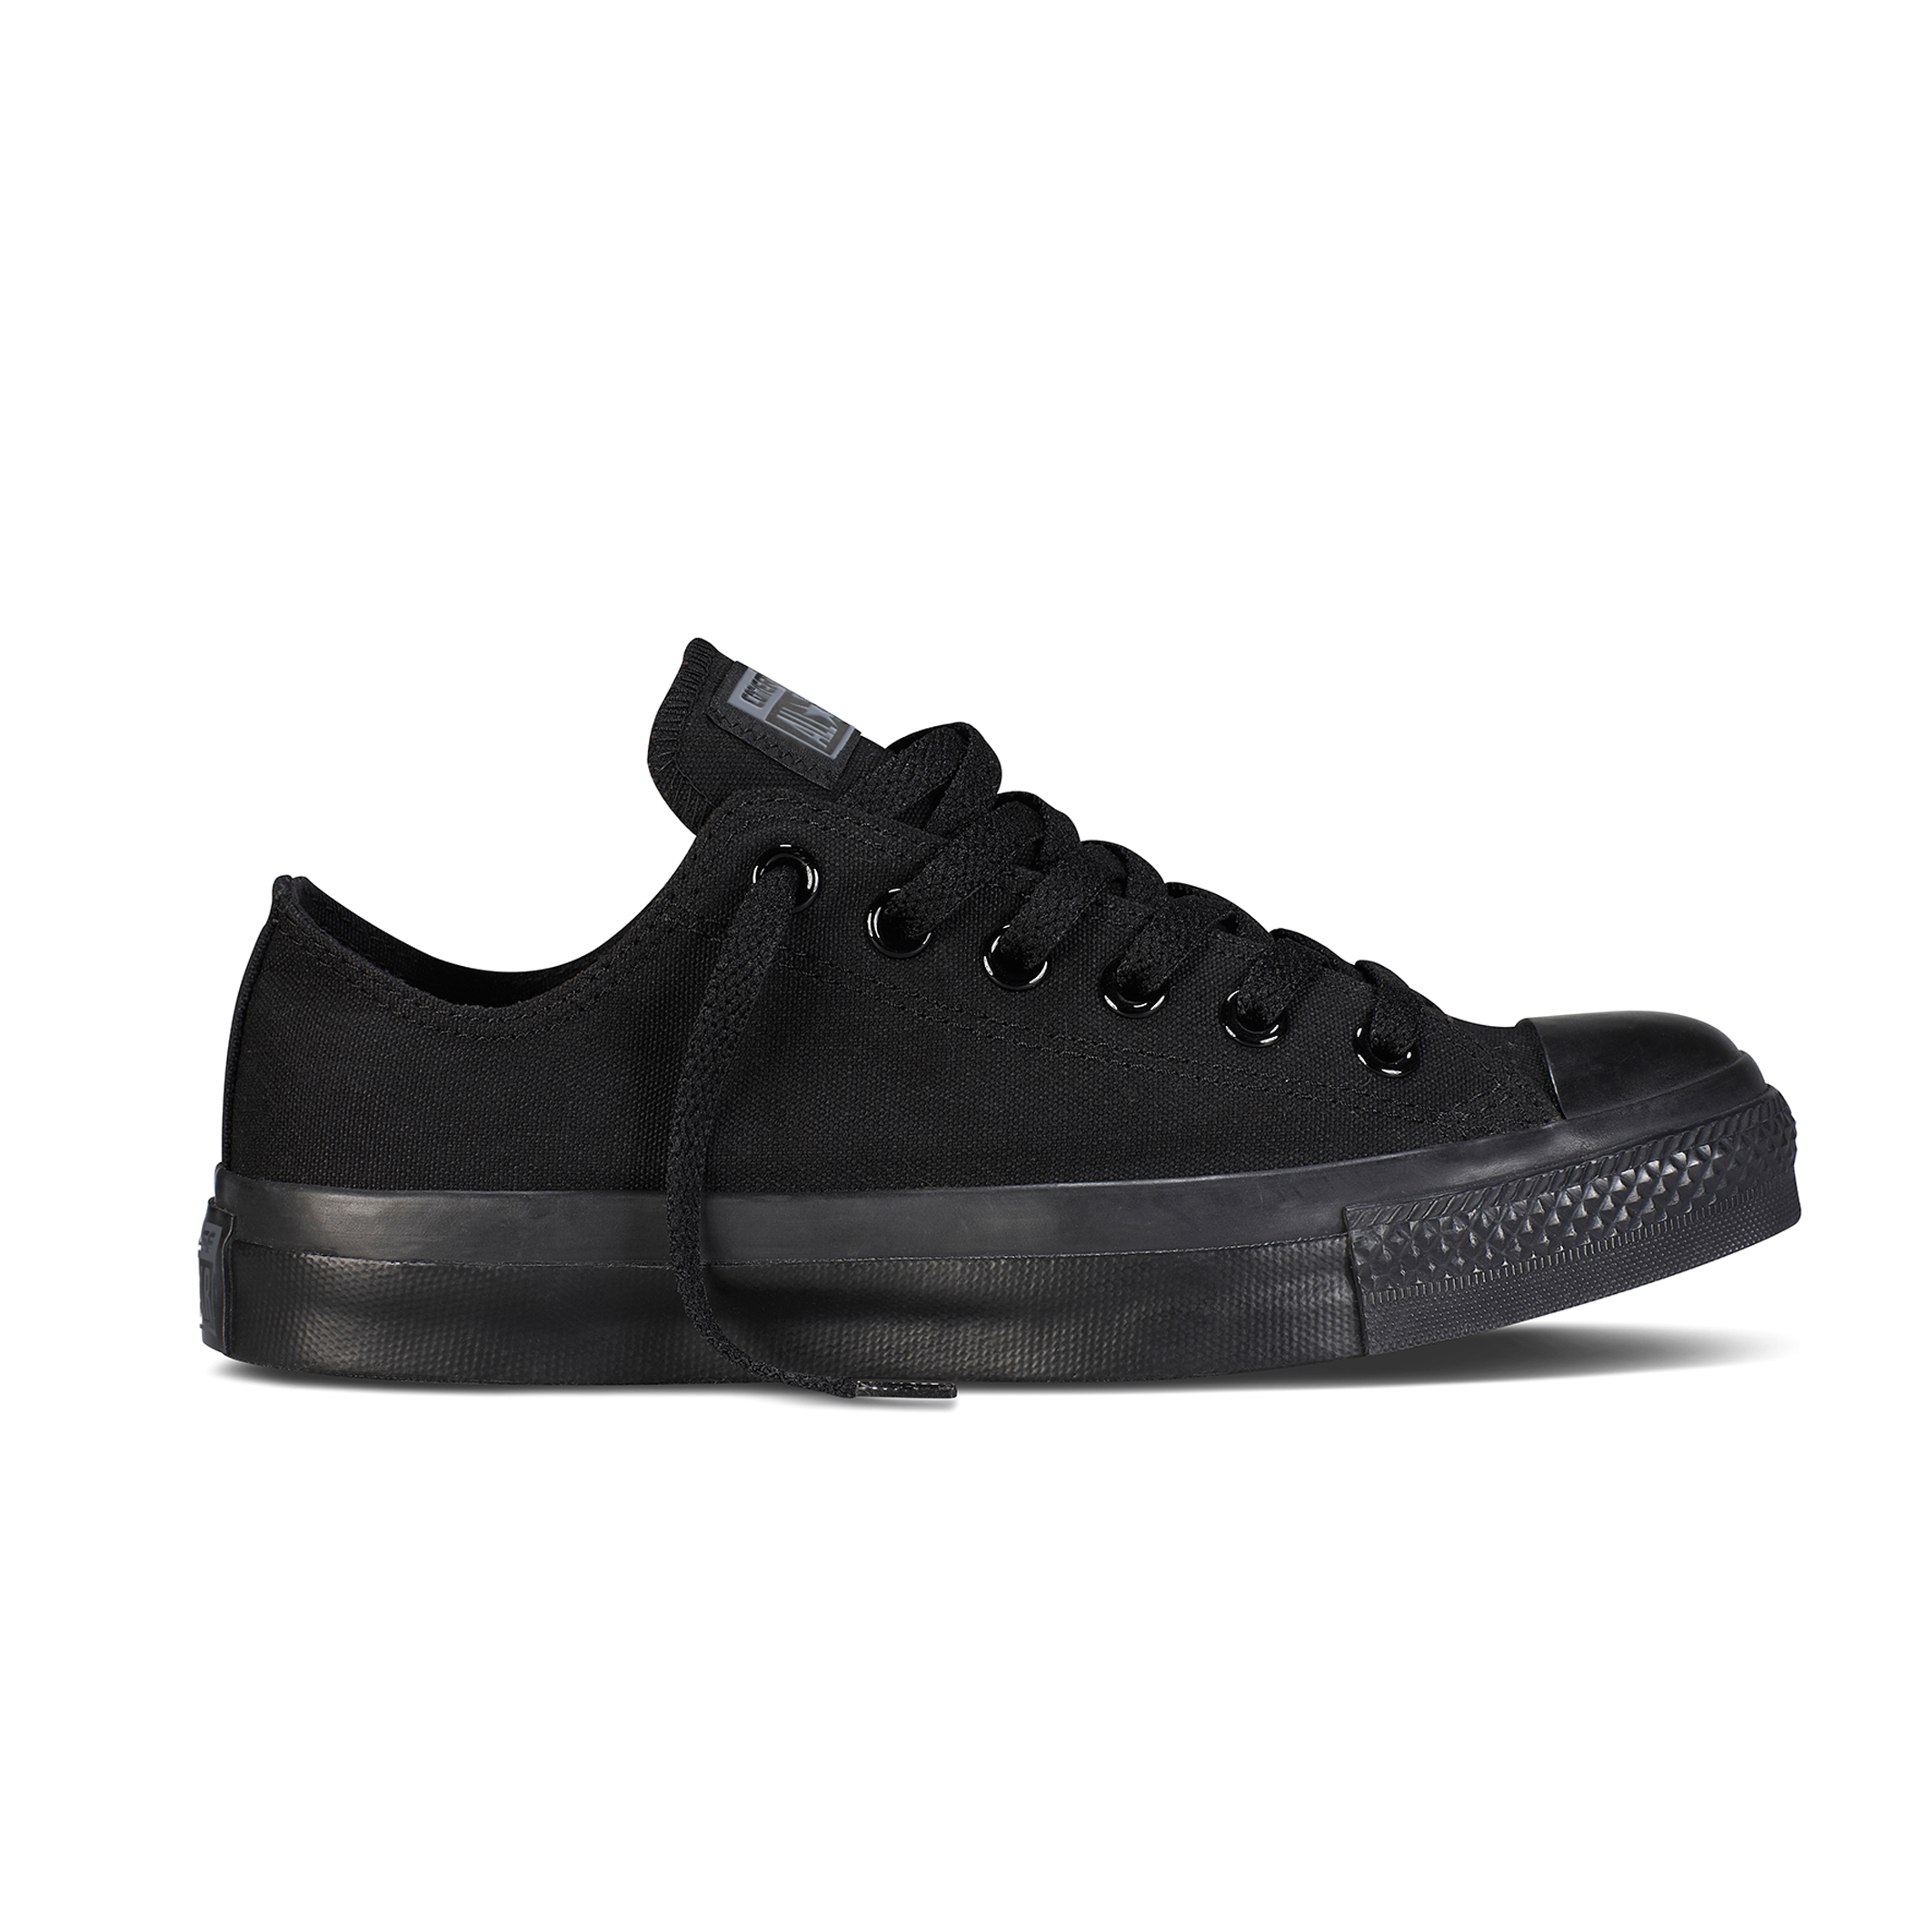 converse all star low tops black